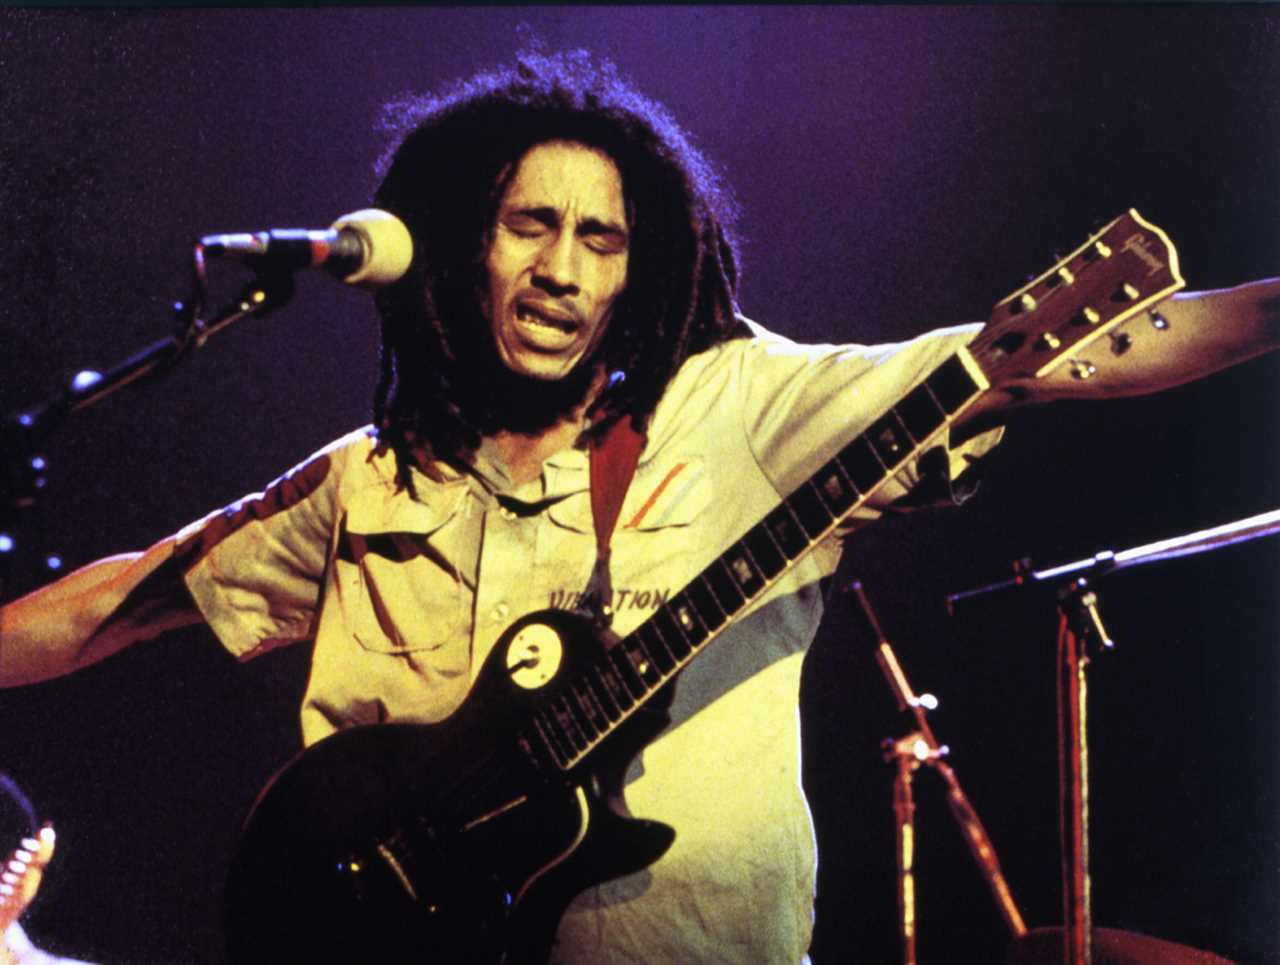 PM Rishi Sunak reveals he and his wife are huge fans of Bob Marley